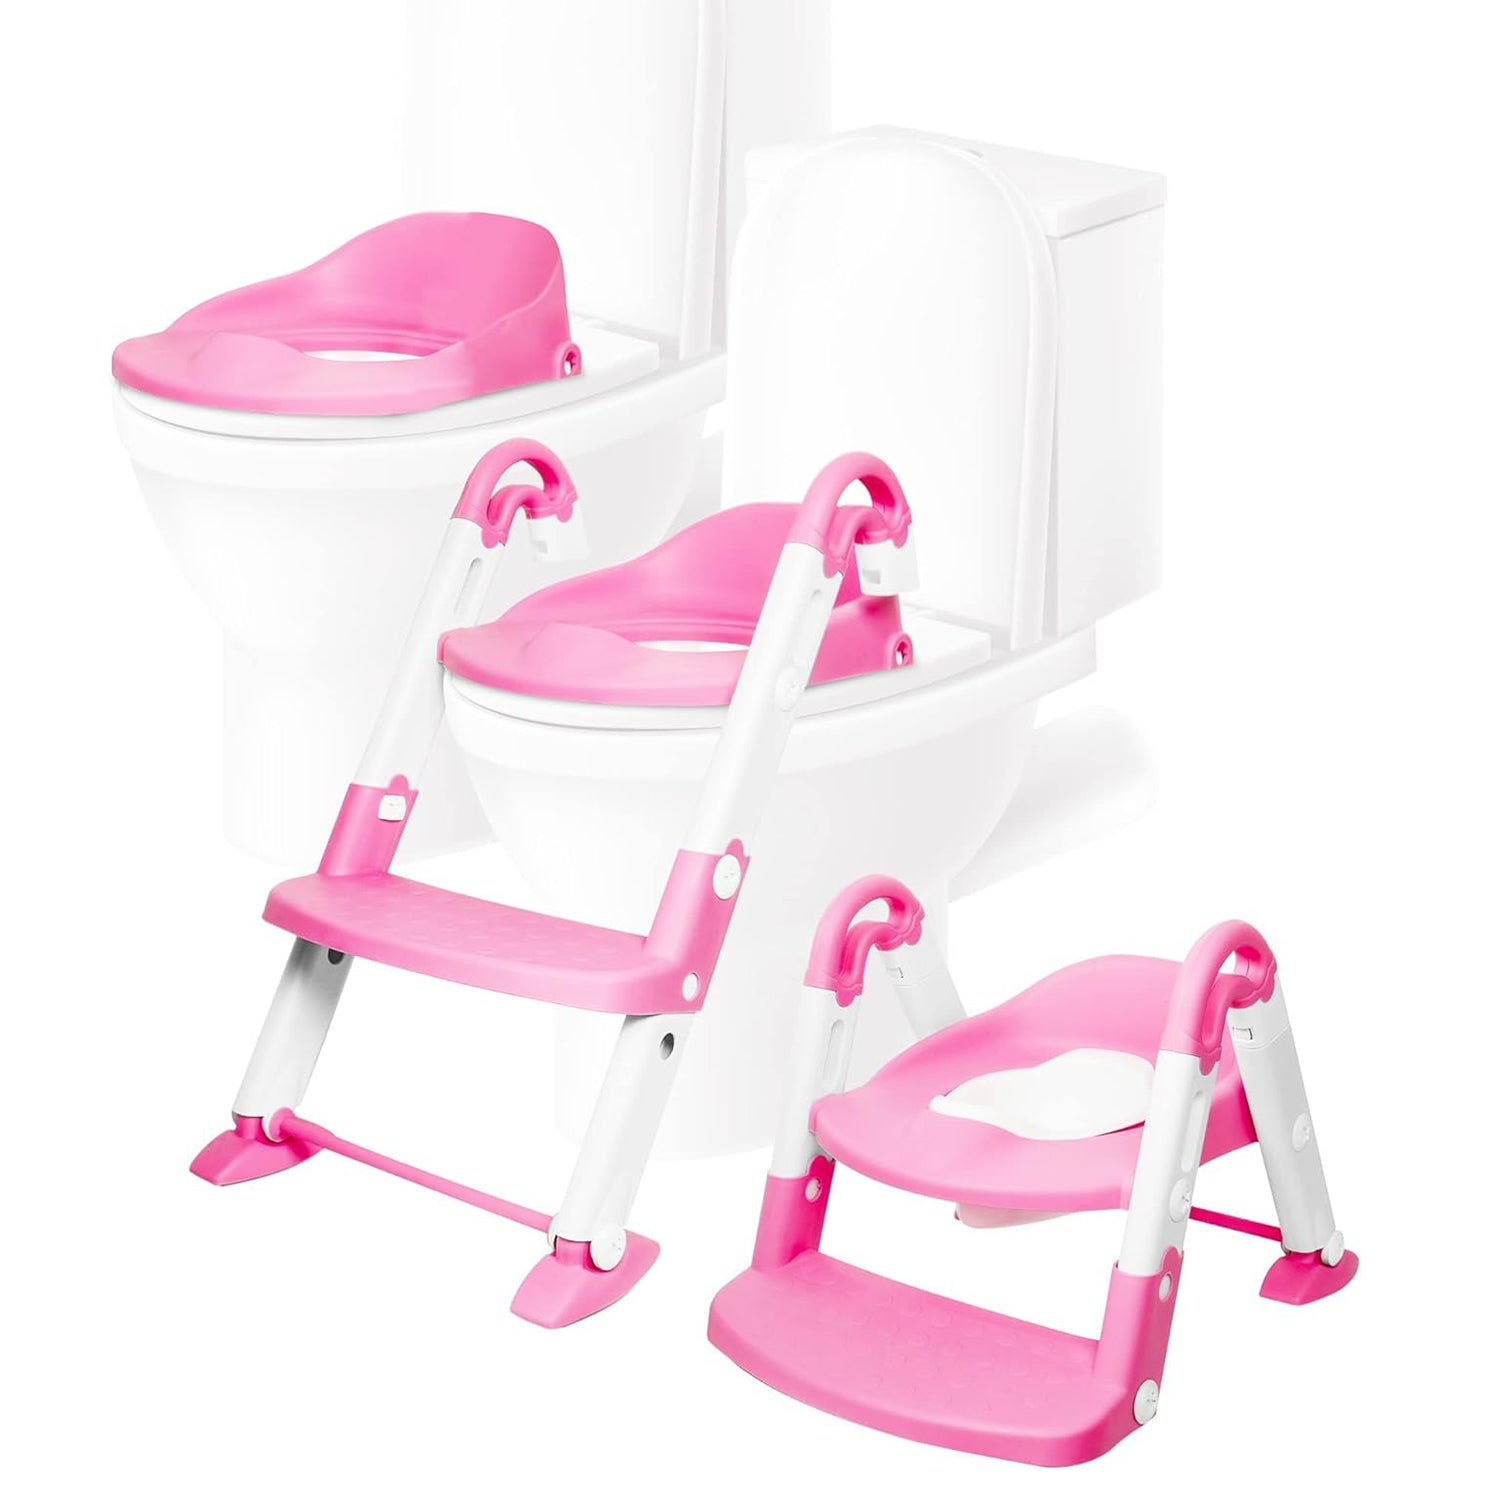 3 in 1 Toddler Potty Training Adjustable Toilet Seat with Non-Slip Step Stool, Pink